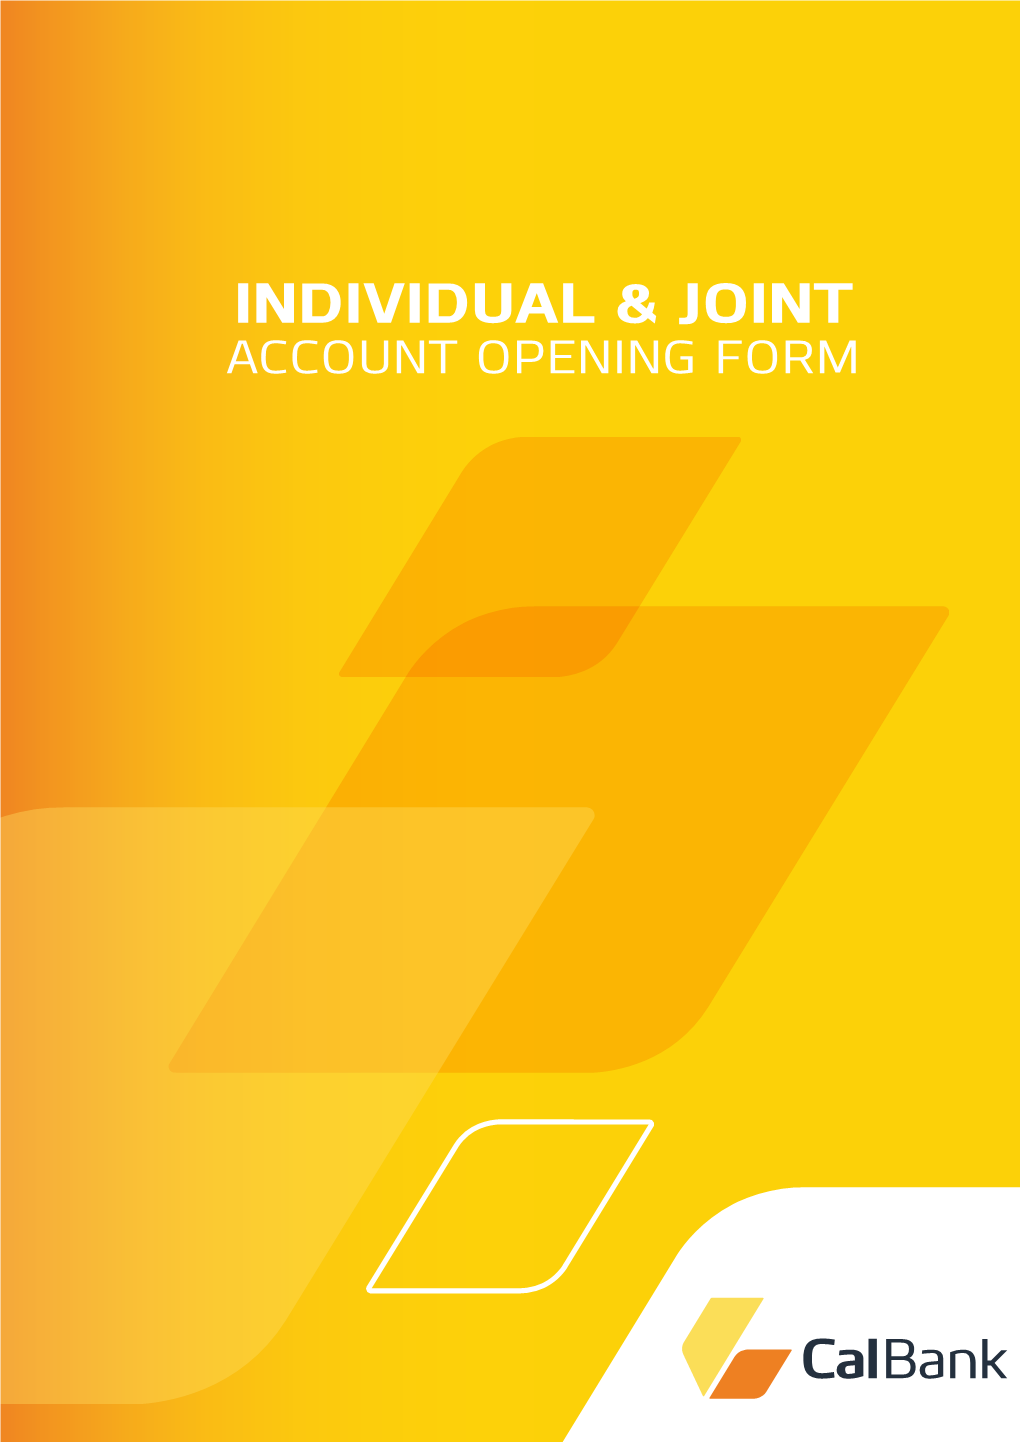 Individual Account Opening Forms Valid National Identification of Account Holder E.G